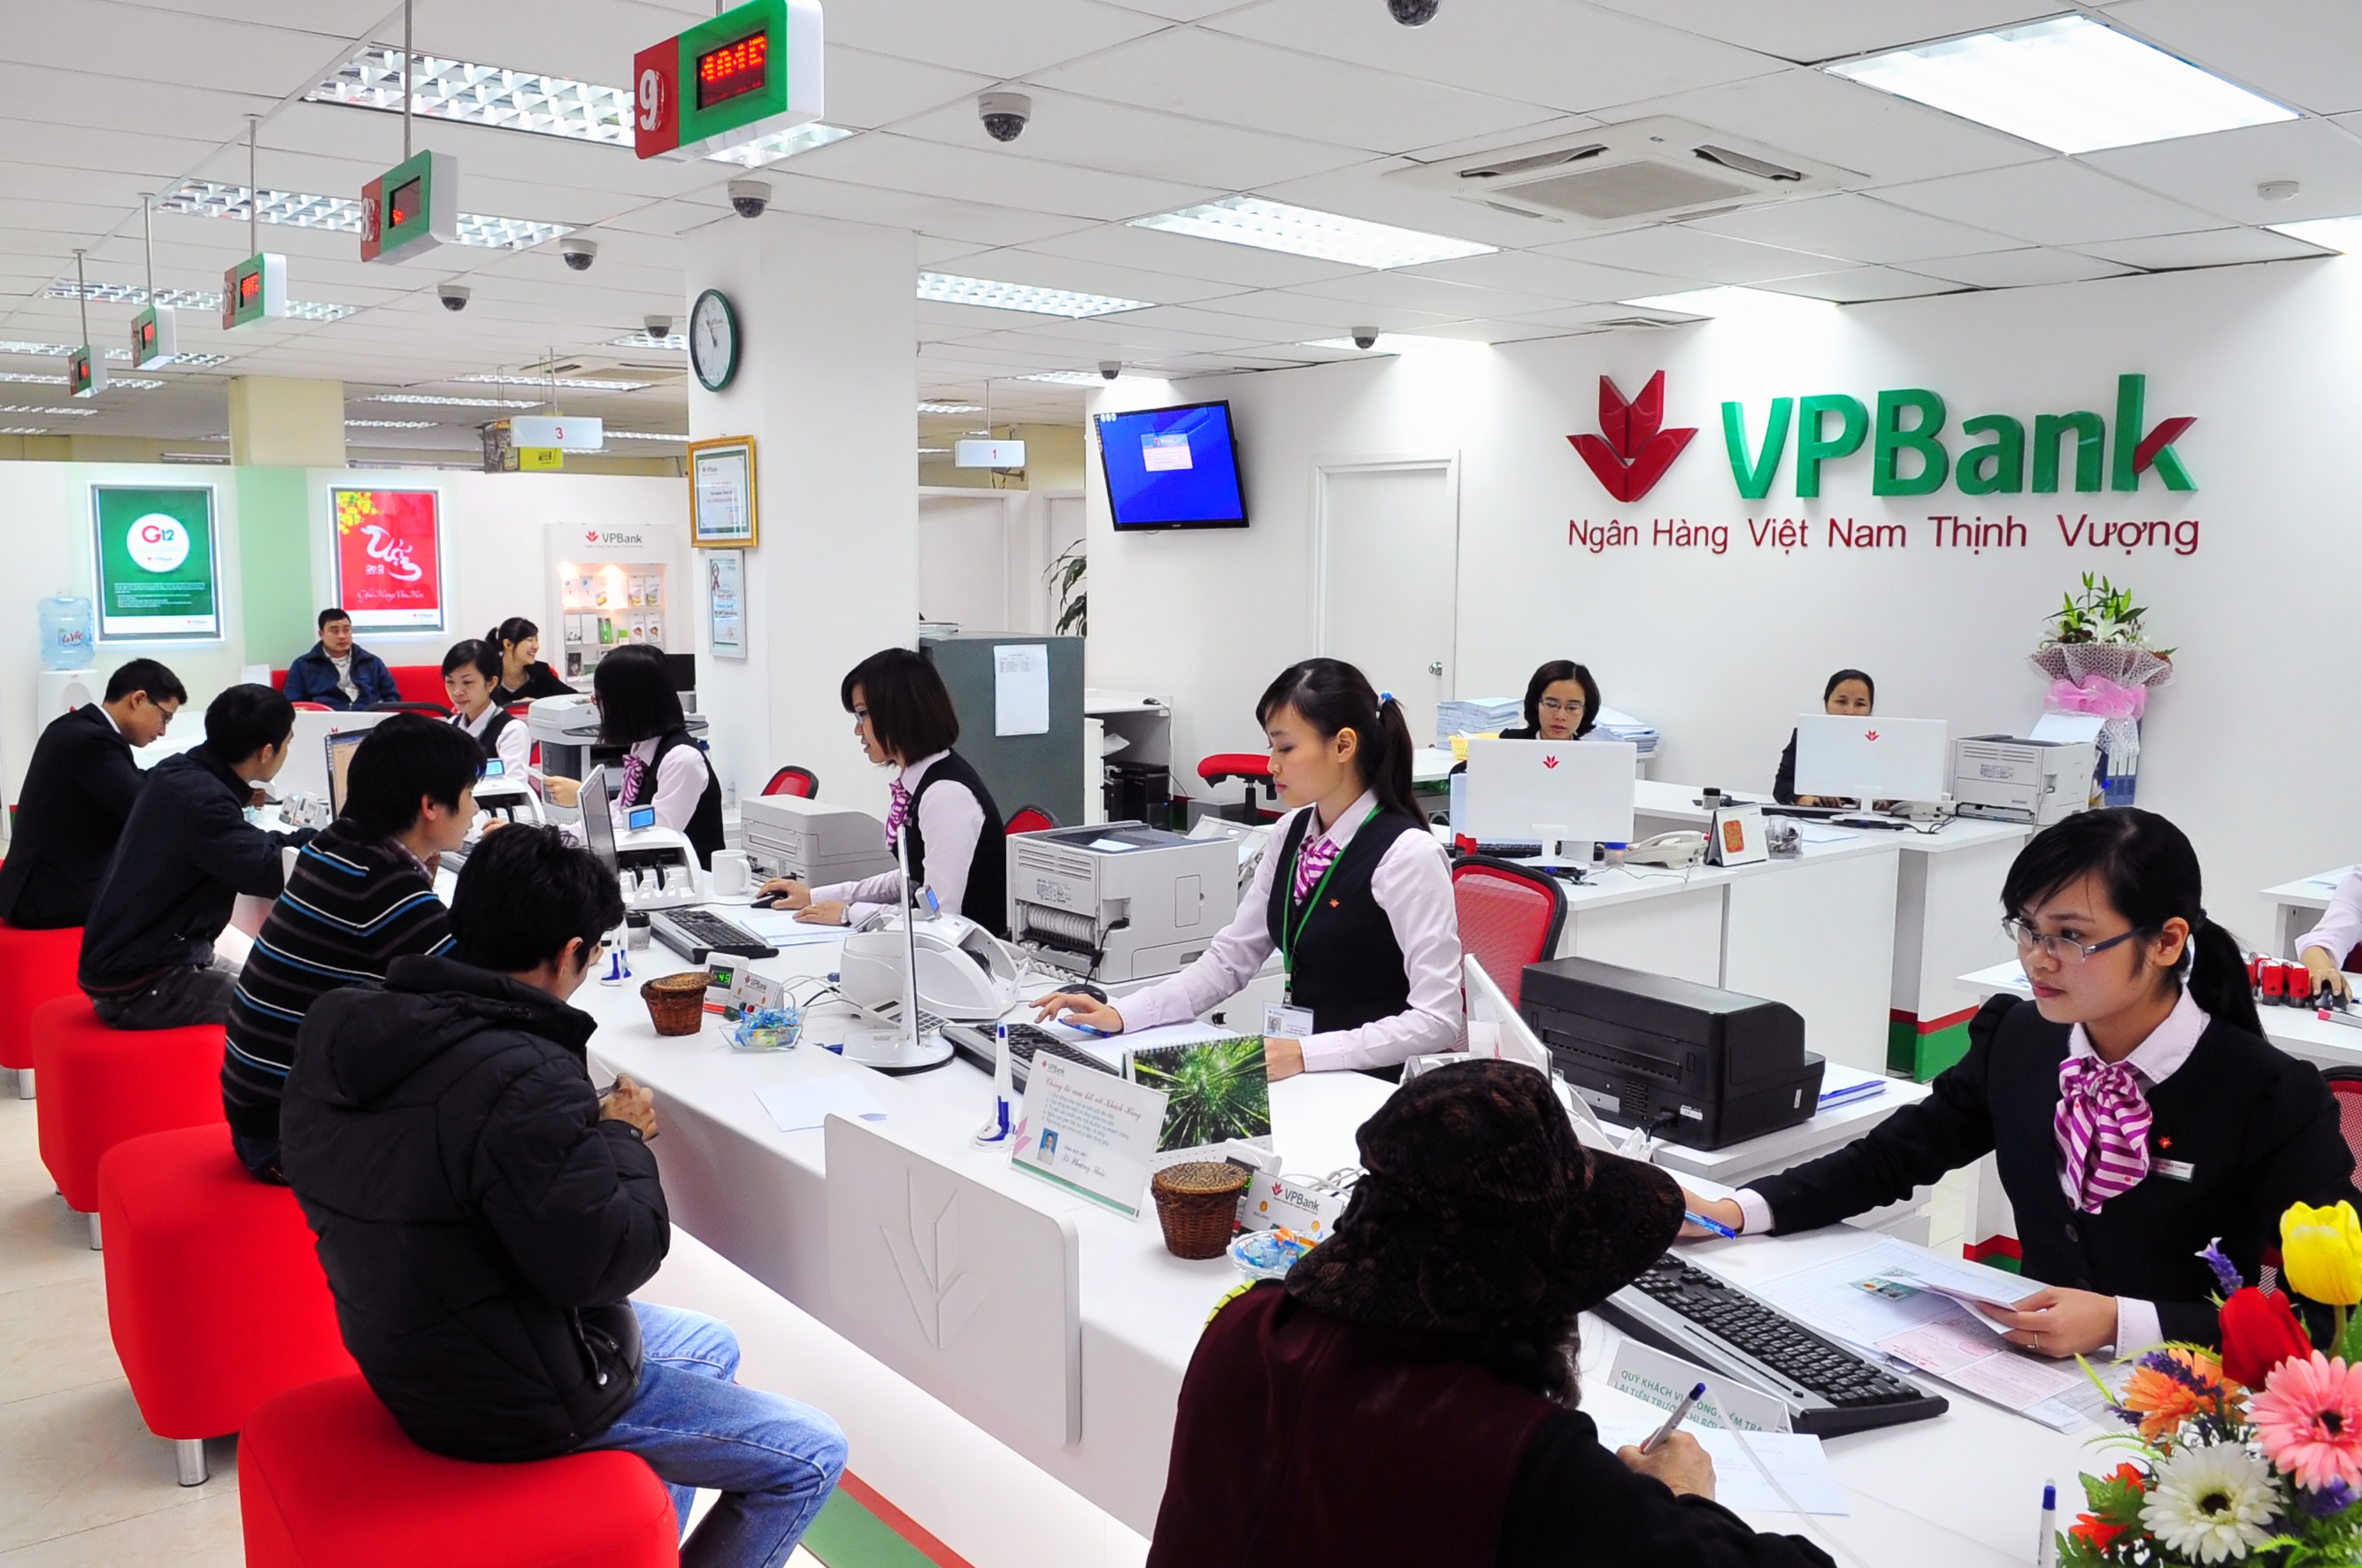 vpbank lifts curtain on high mobilisation rate